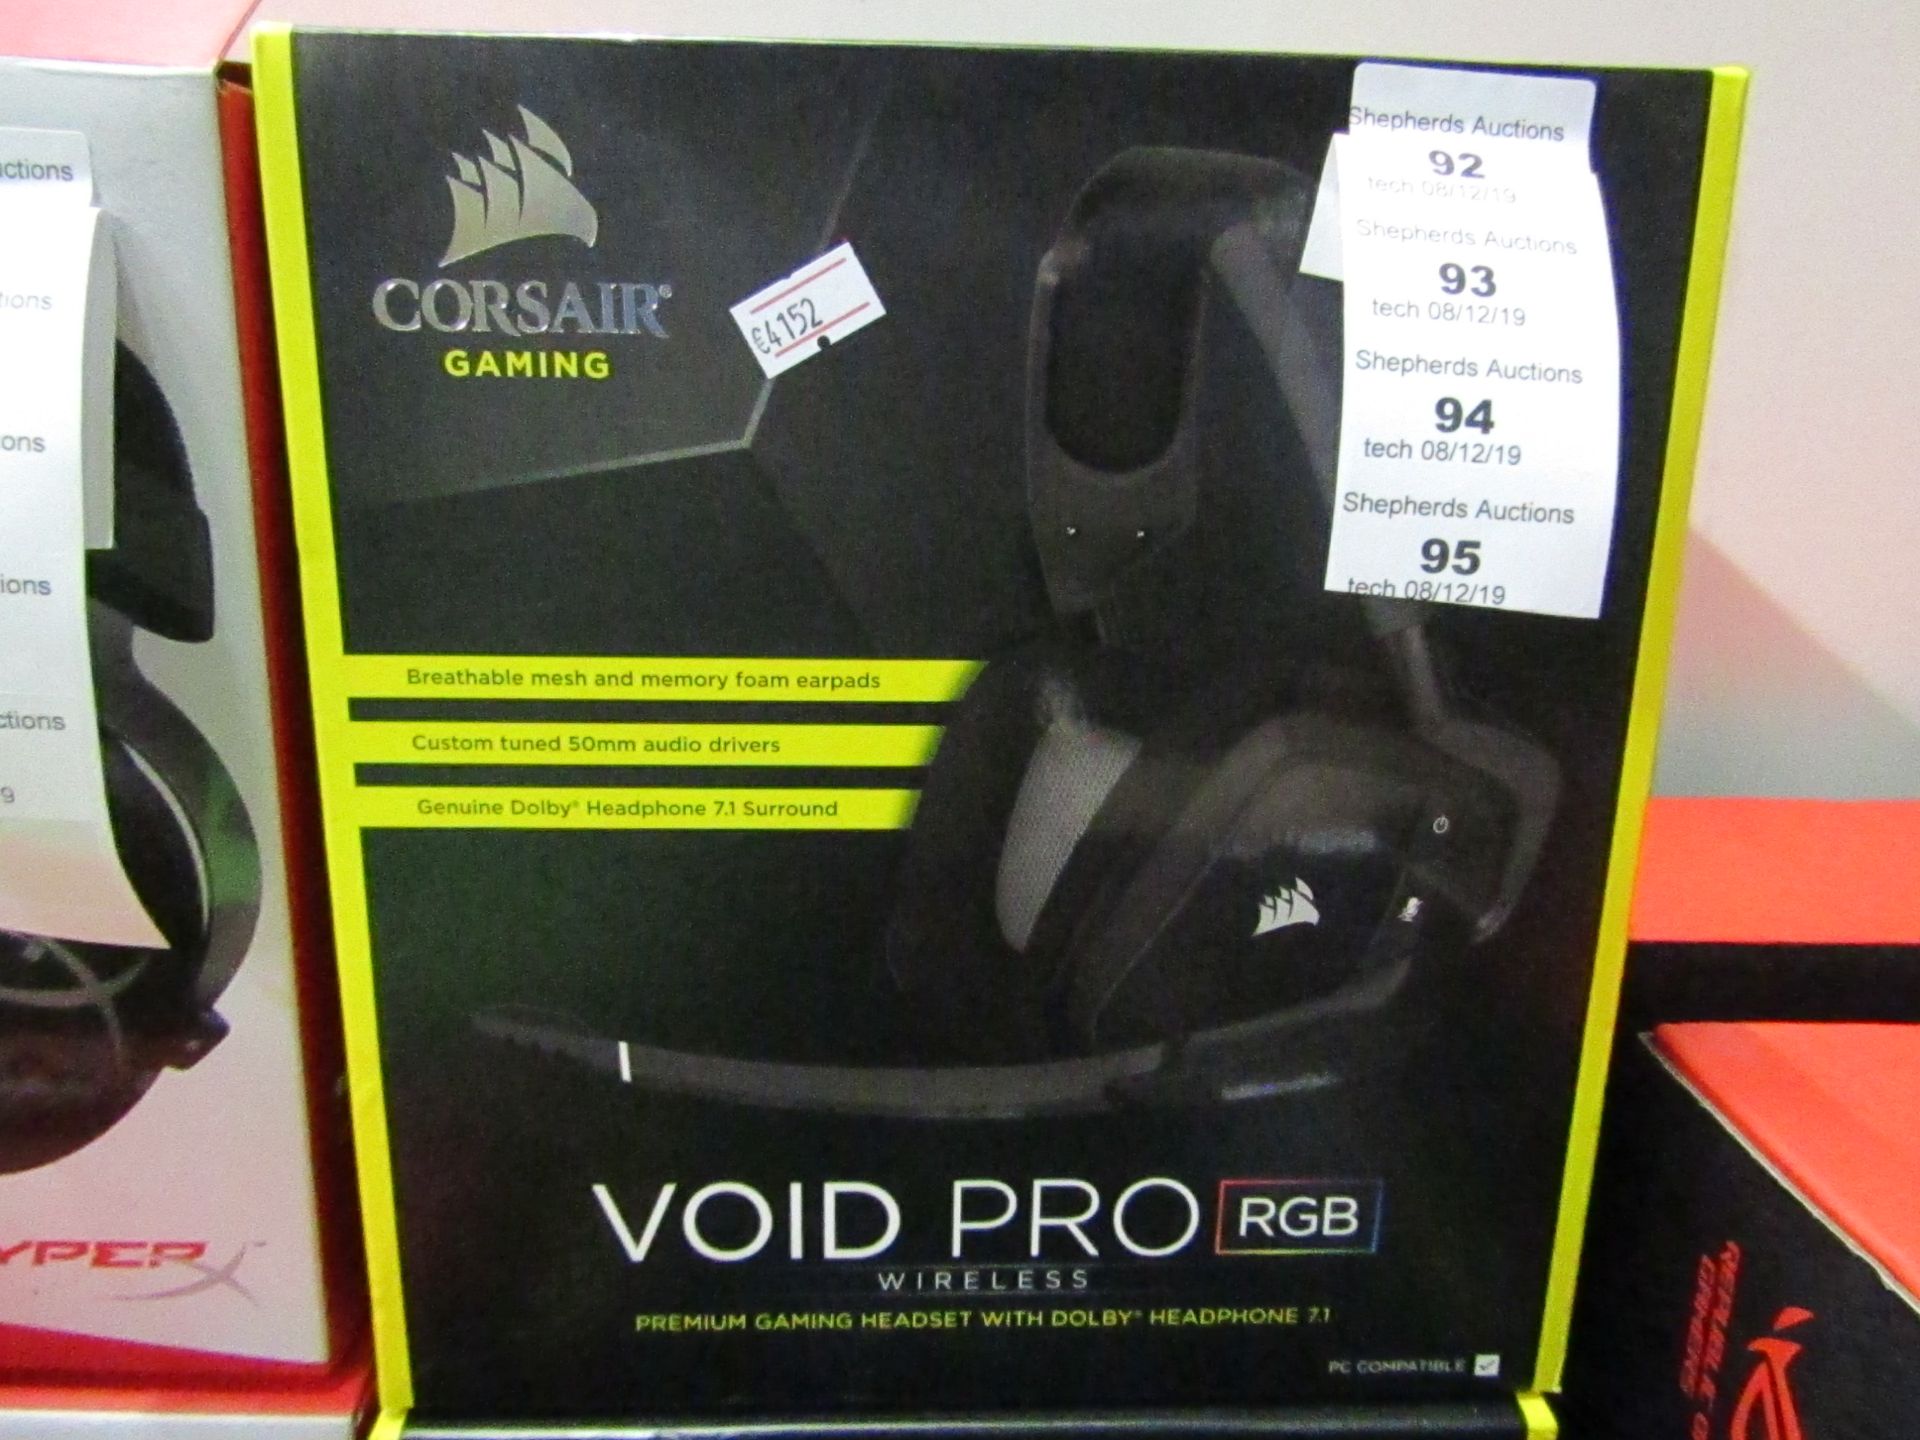 Corsair Gaming VOID Pro RGB wireless premium gaming headset with Dolby 7.1, untested and boxed.